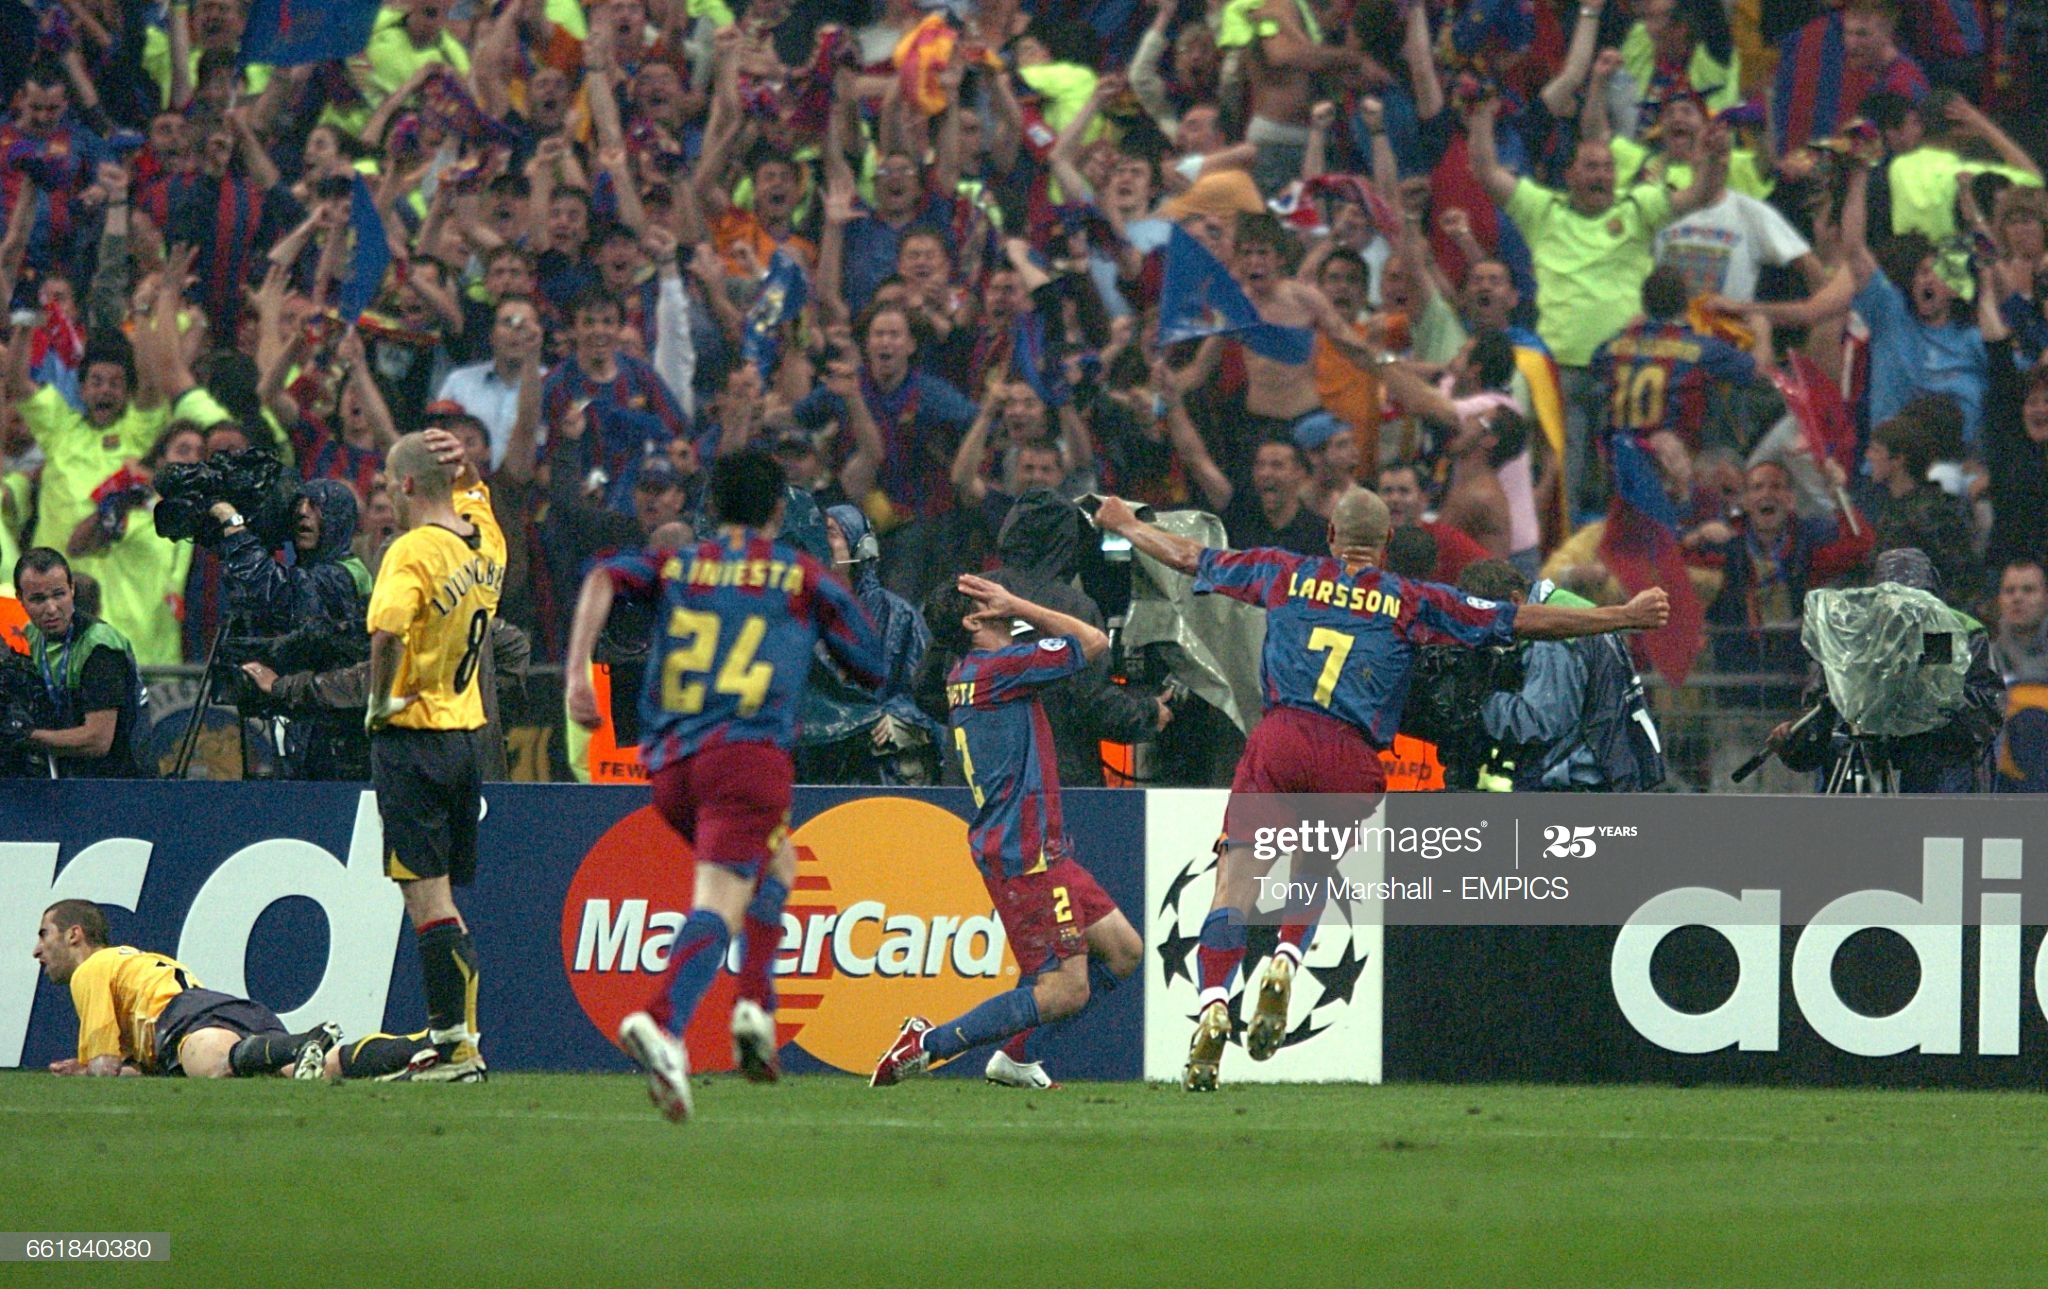 Barcelona's Juliano Belletti celebrates his goal in front of the Barcelona fans (Photo by Tony Marshall - PA